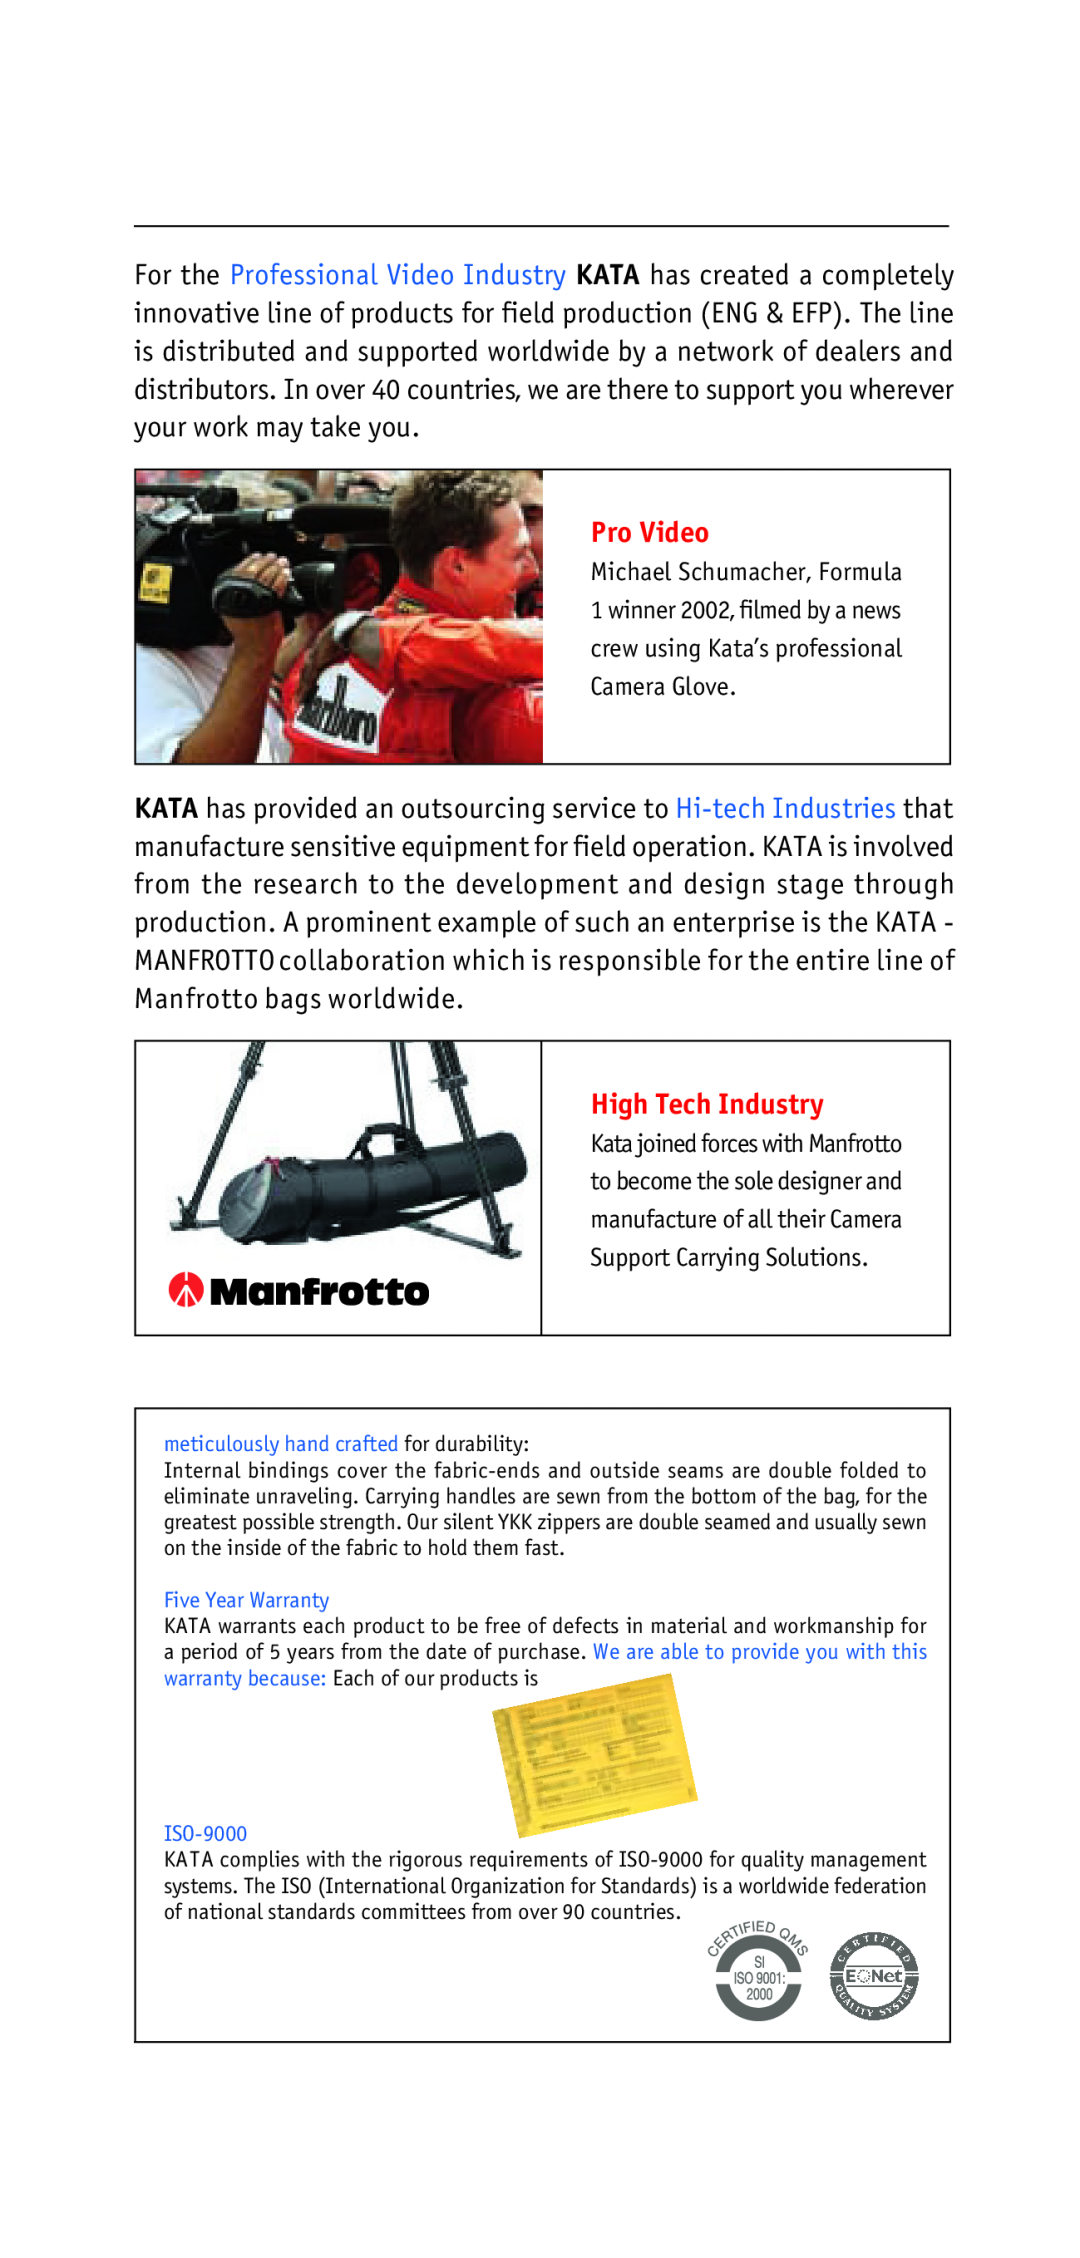 KATA KT A34U manual Pro Video, High Tech Industry, meticulously hand crafted for durability, Five Year Warranty, ISO-9000 